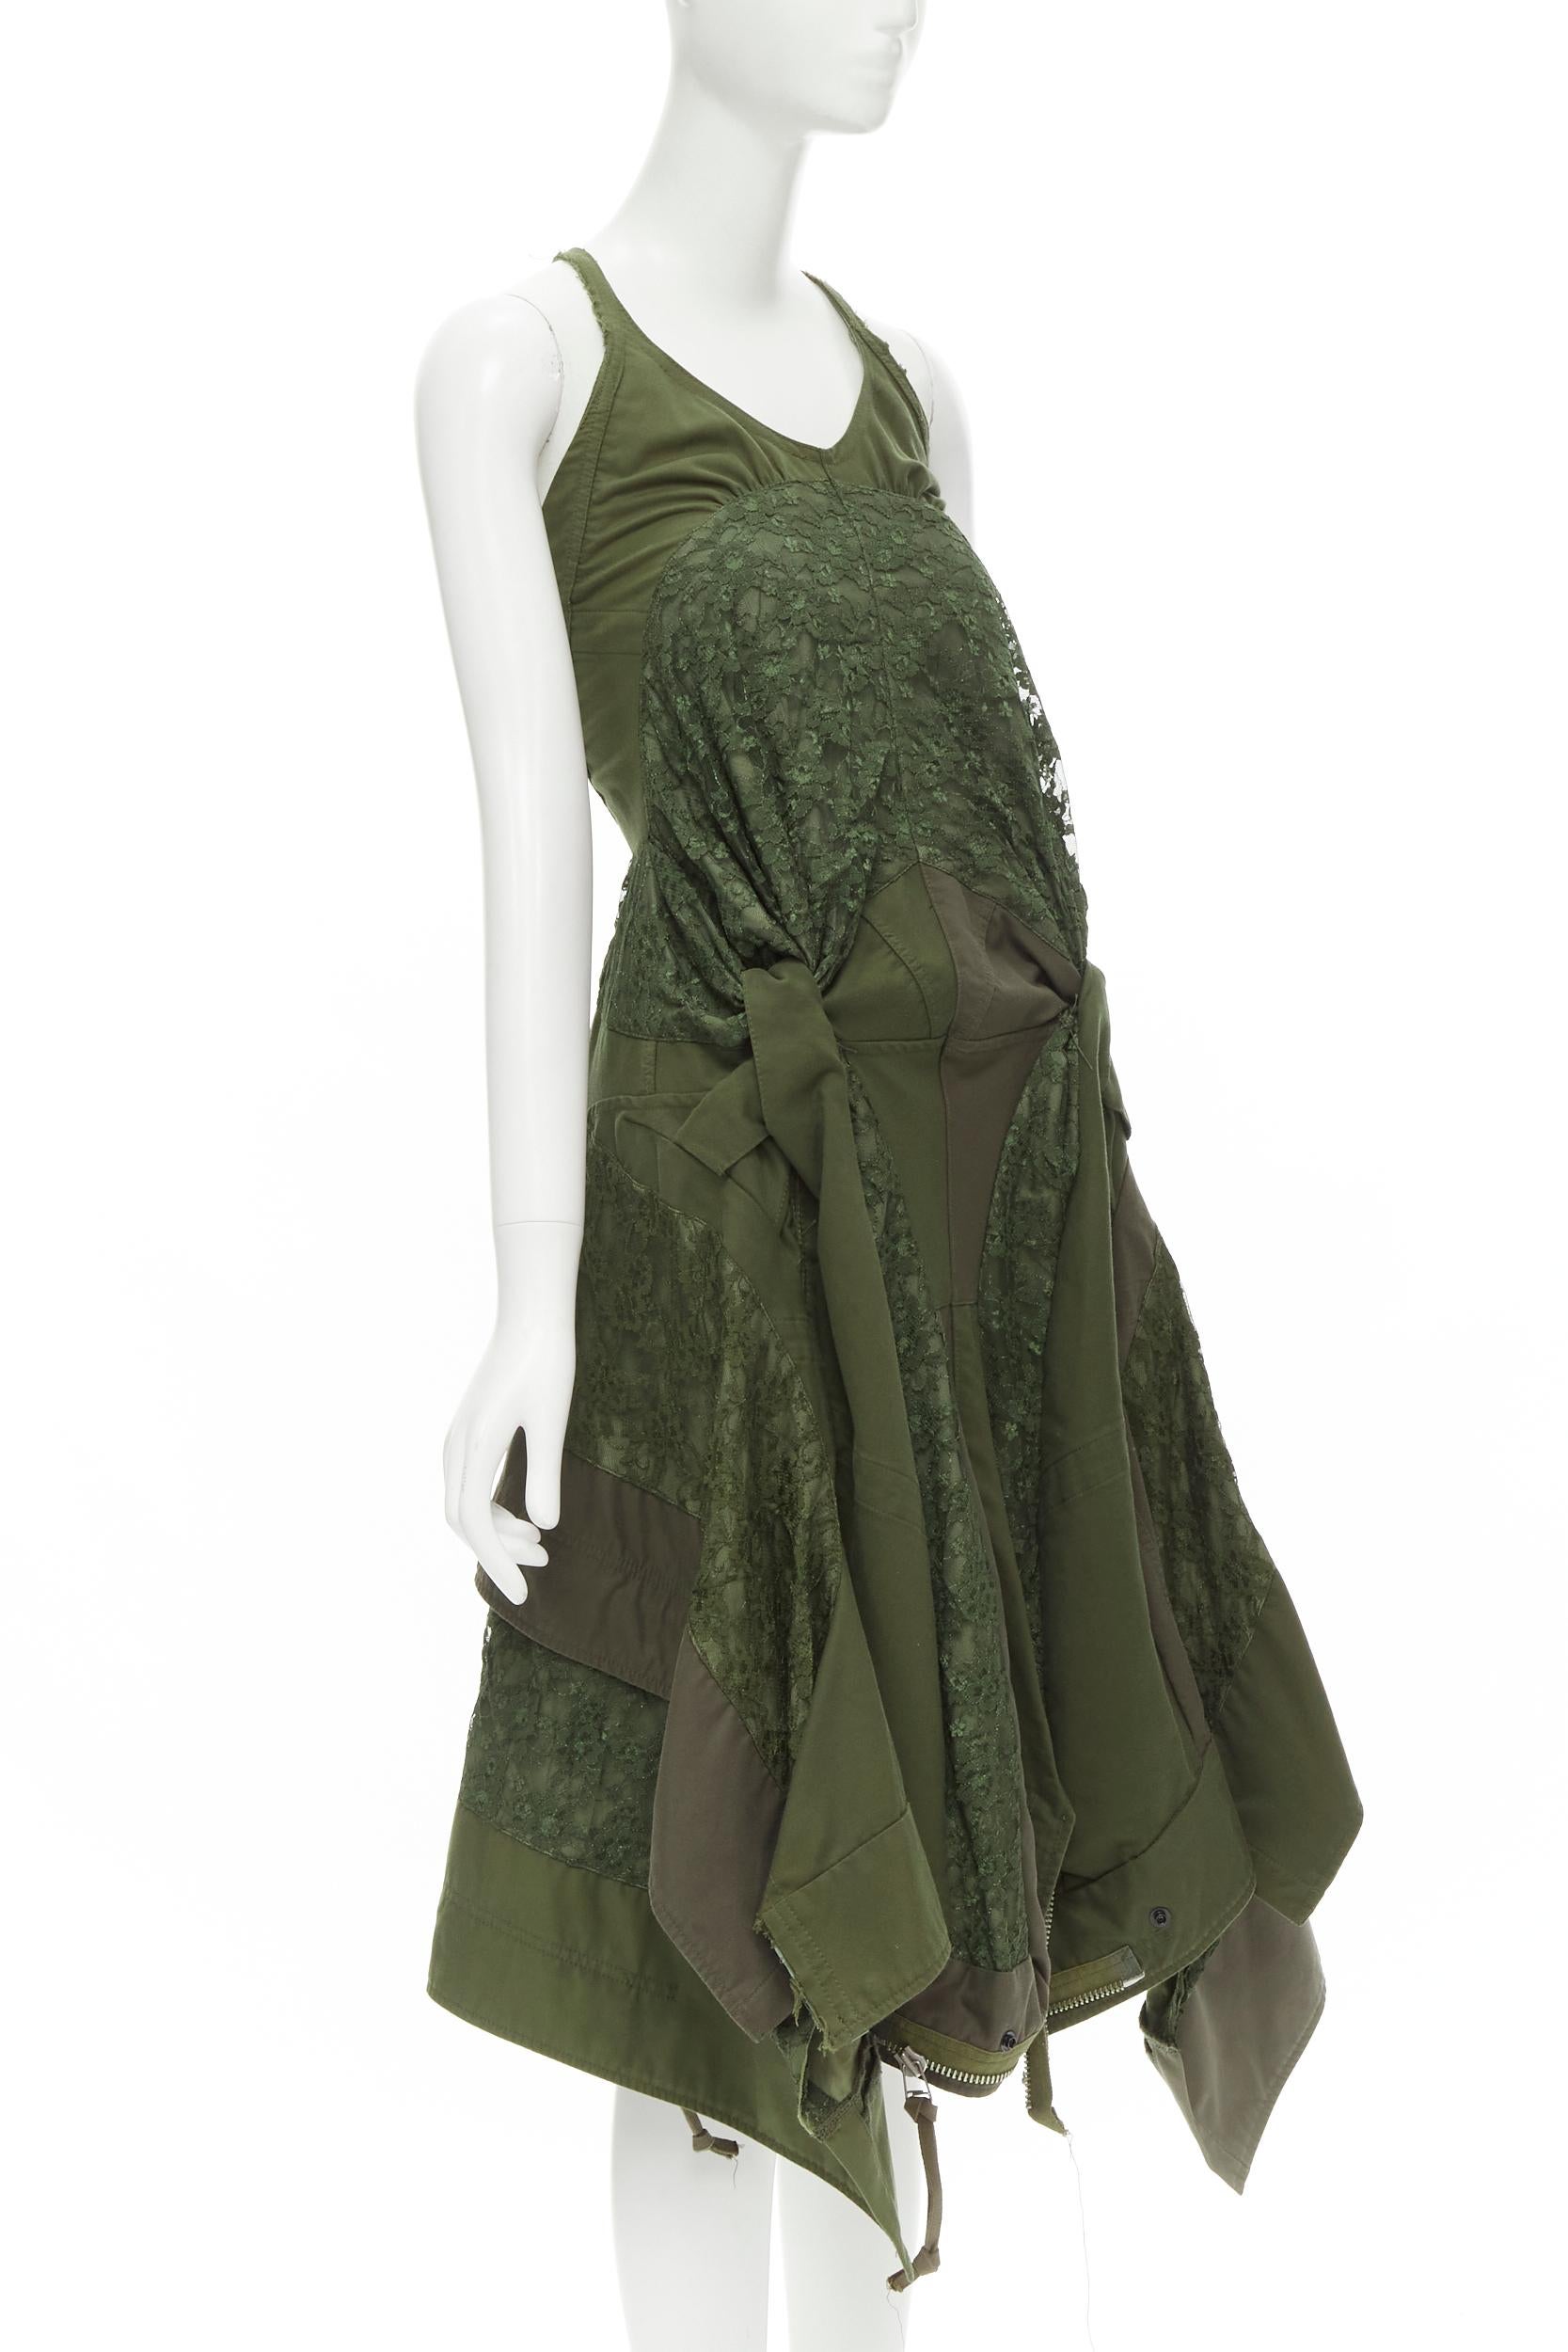 Black JUNYA WATANABE 2006 Runway military  green lace deconstructed dress XS For Sale